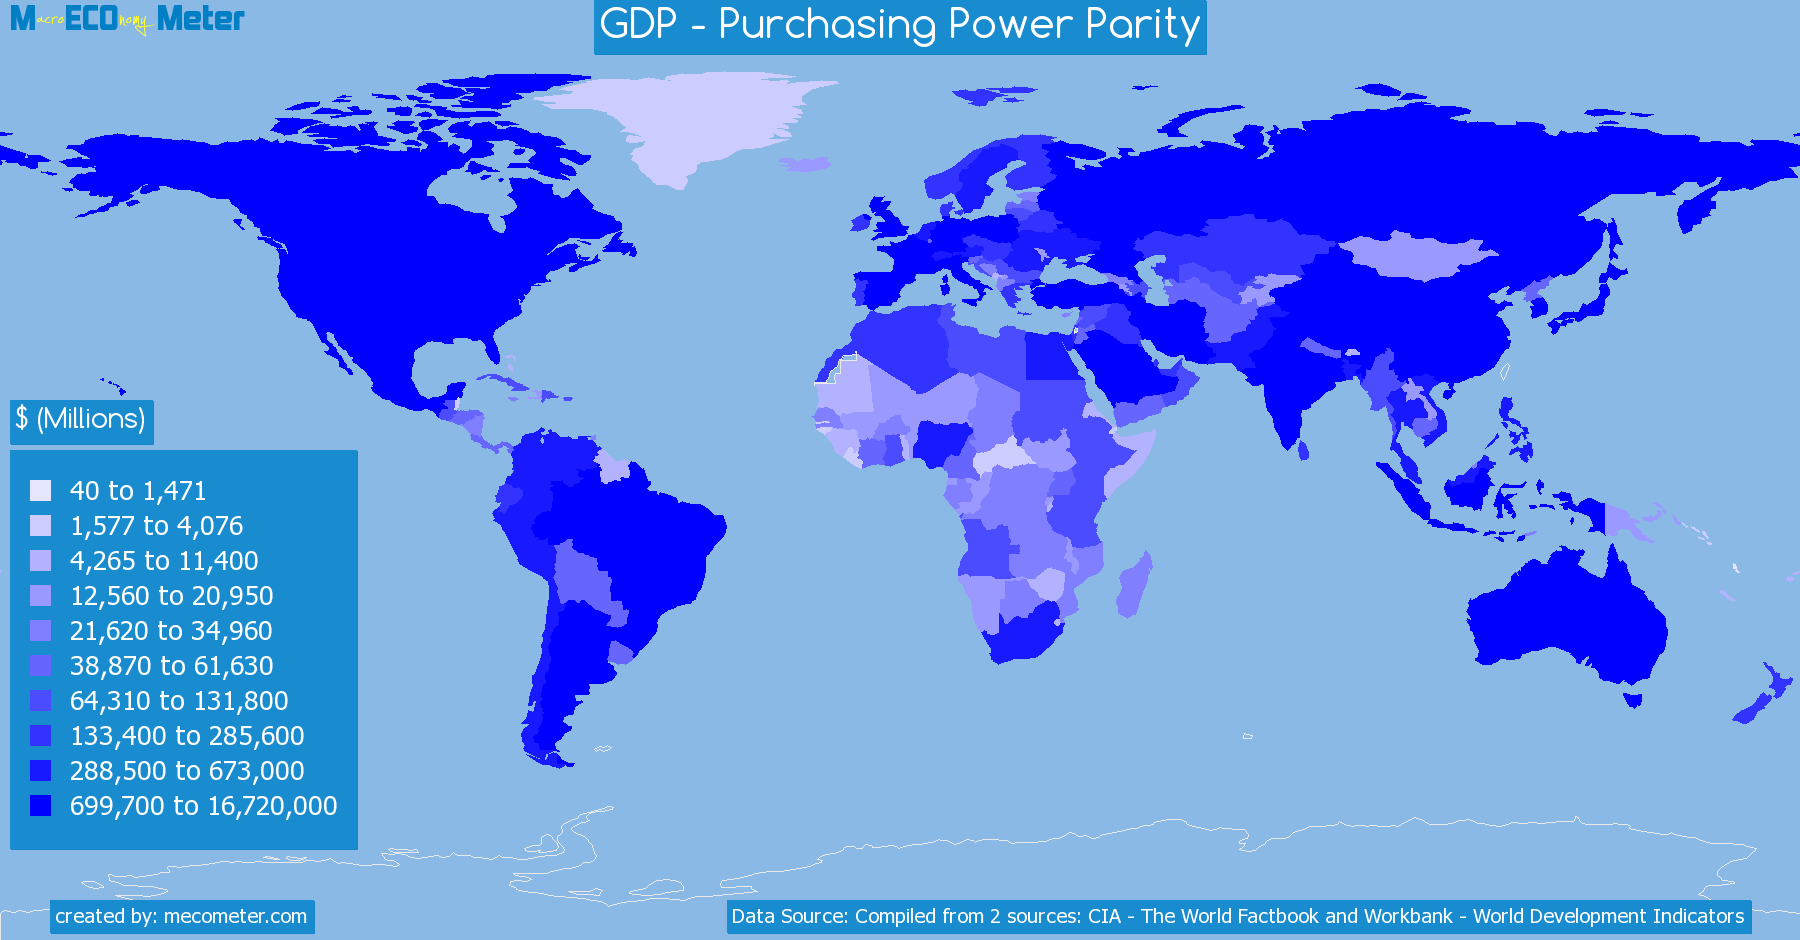 Worldmap of all countries colored to reflect the values of GDP - Purchasing Power Parity